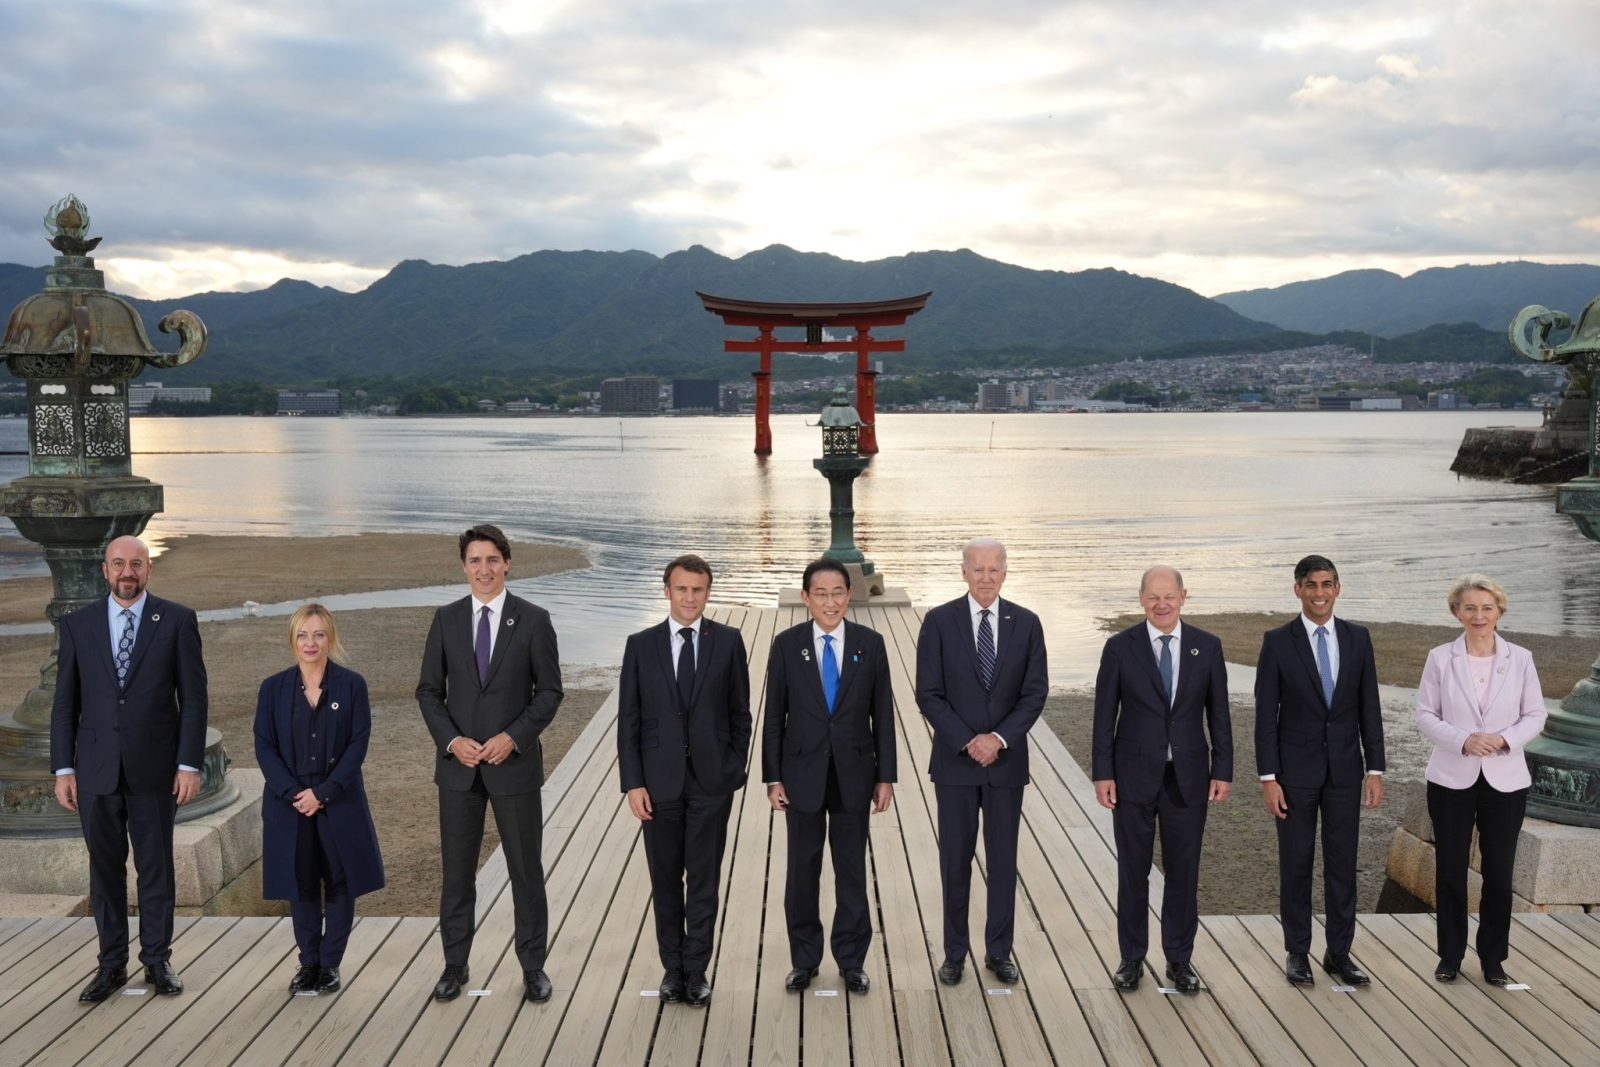 G7 summit commits to energy transition, AI governance